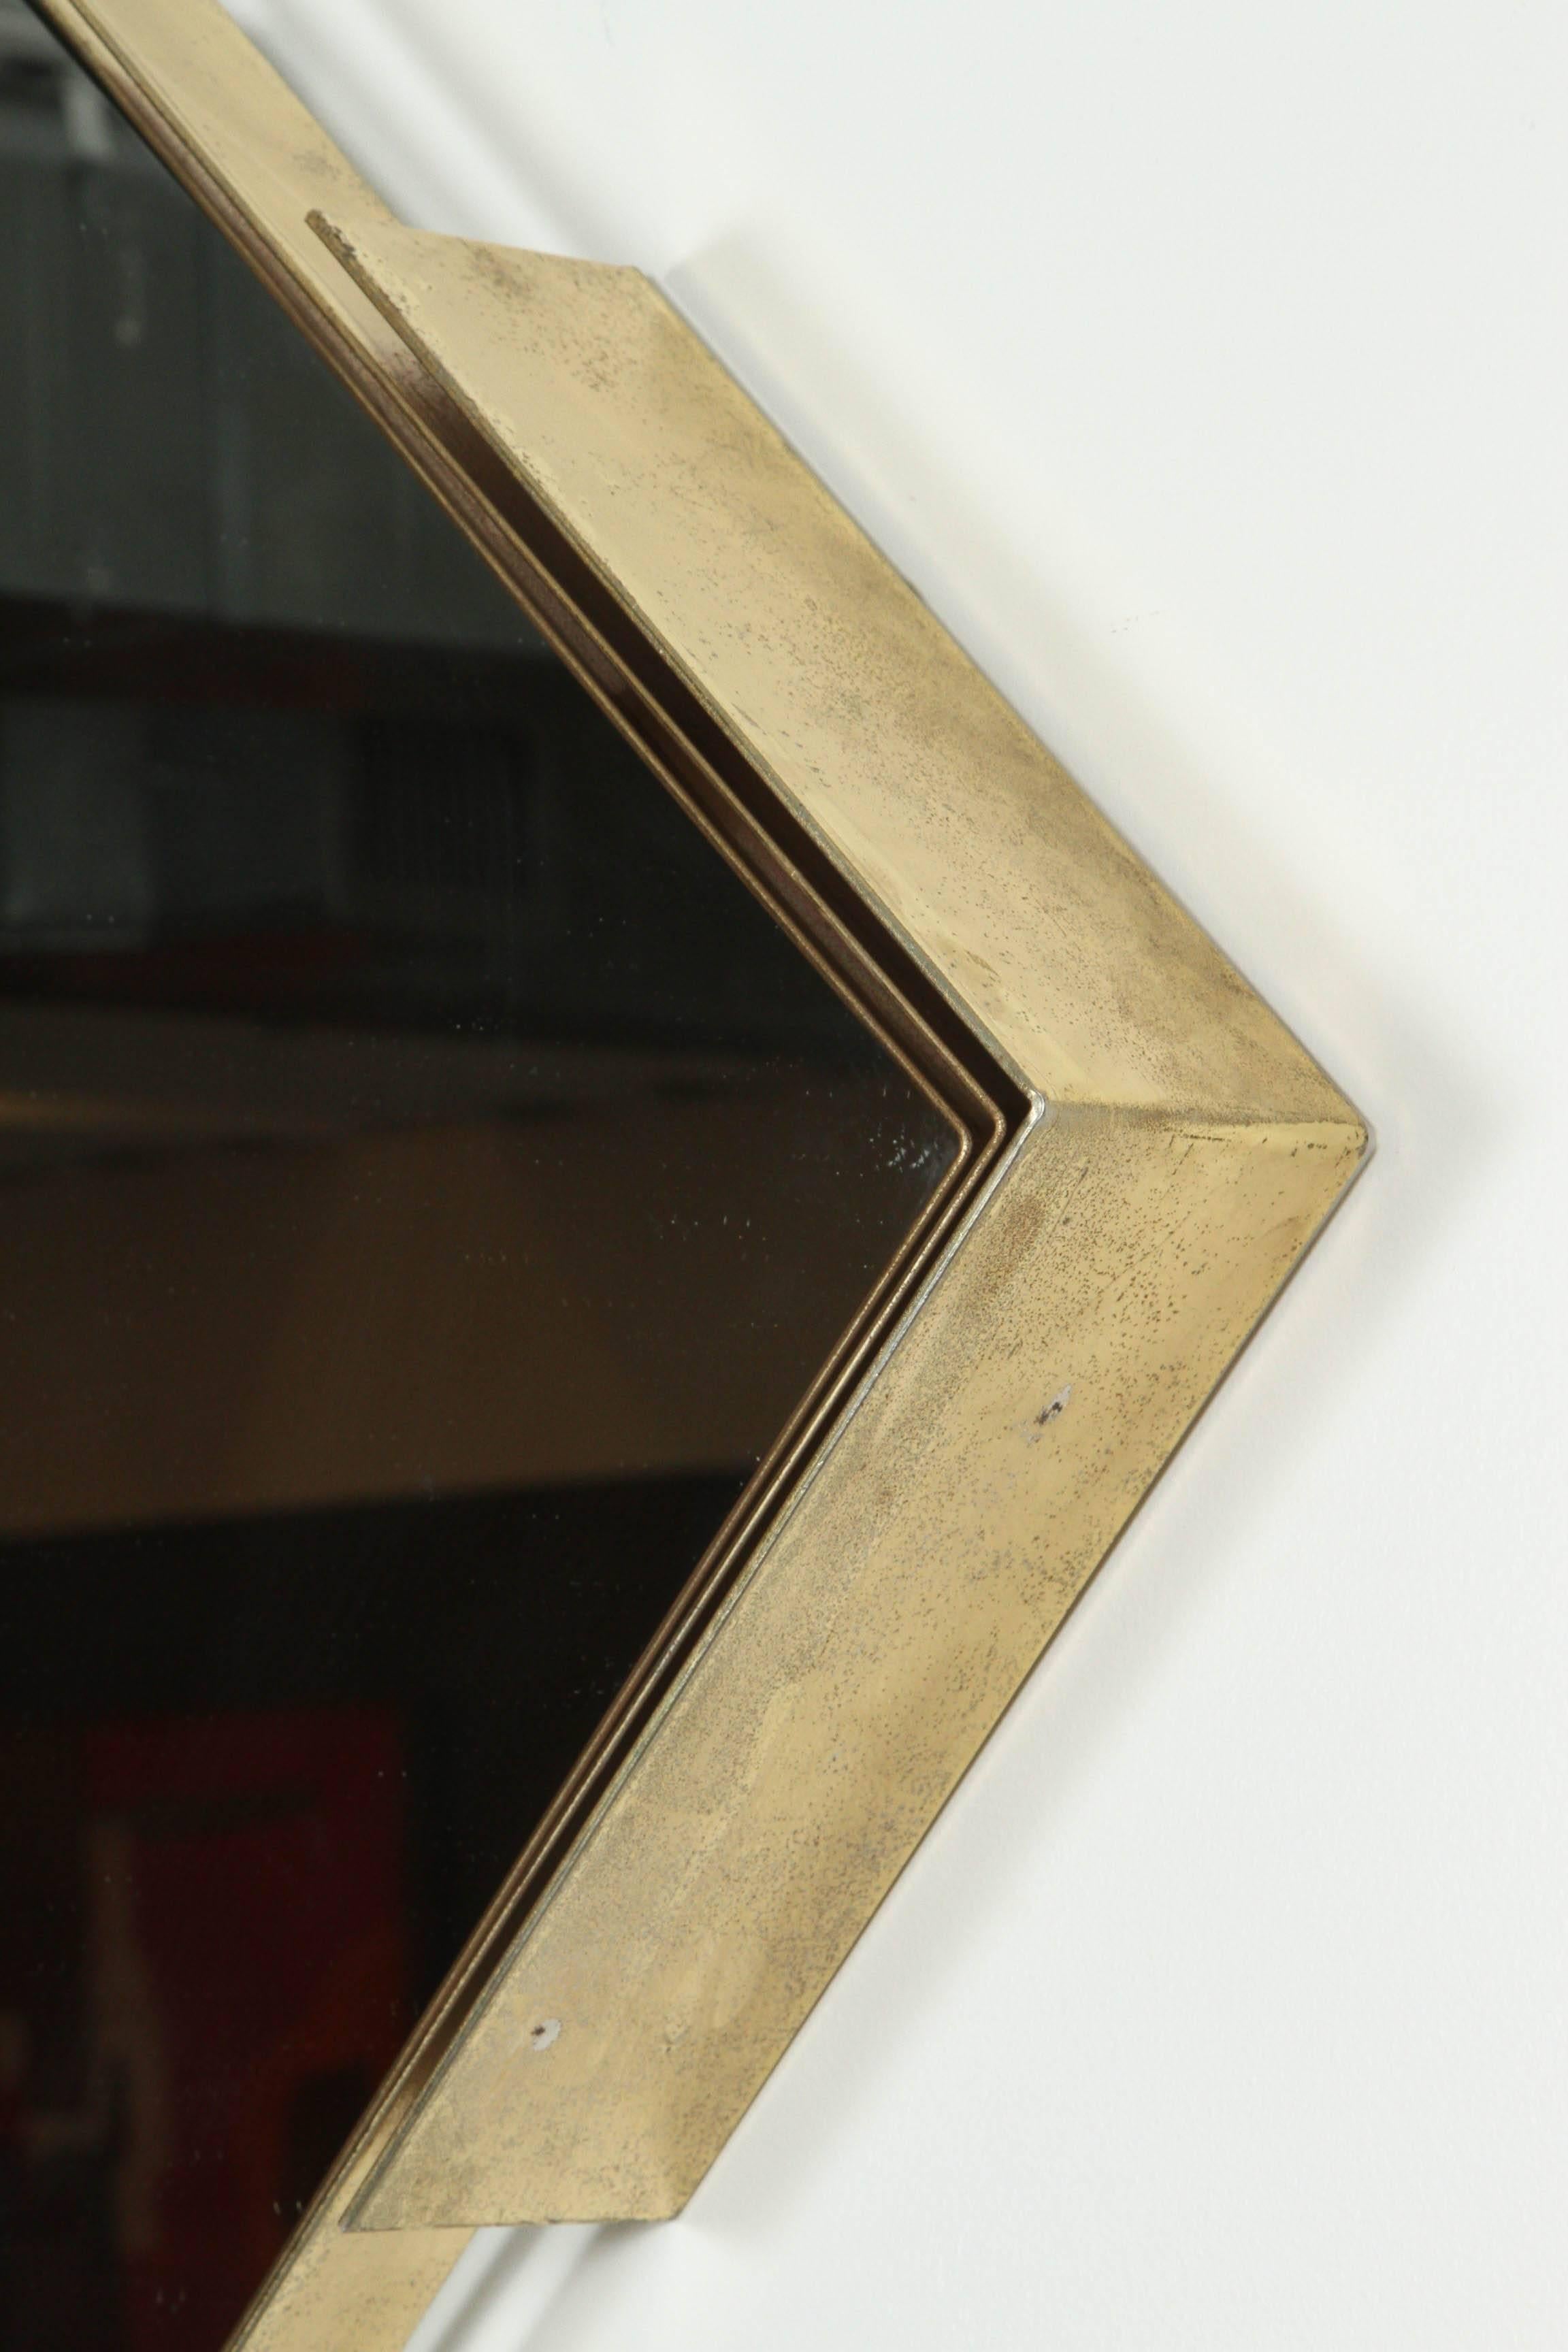 American Square Mirror by Curtis Jere